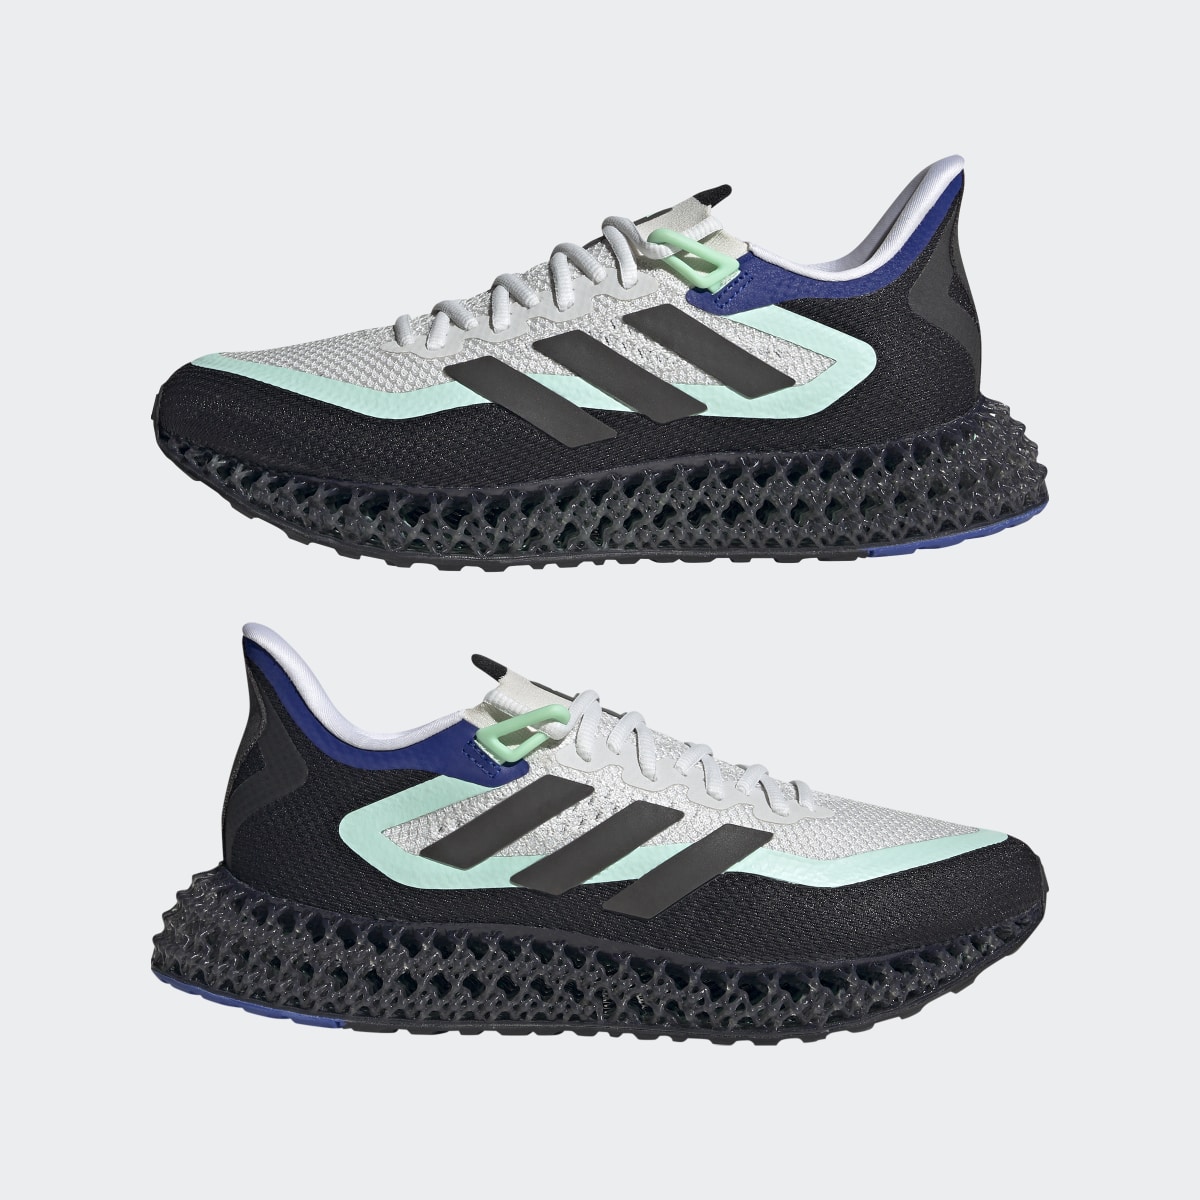 Adidas 4DFWD Running Shoes. 14